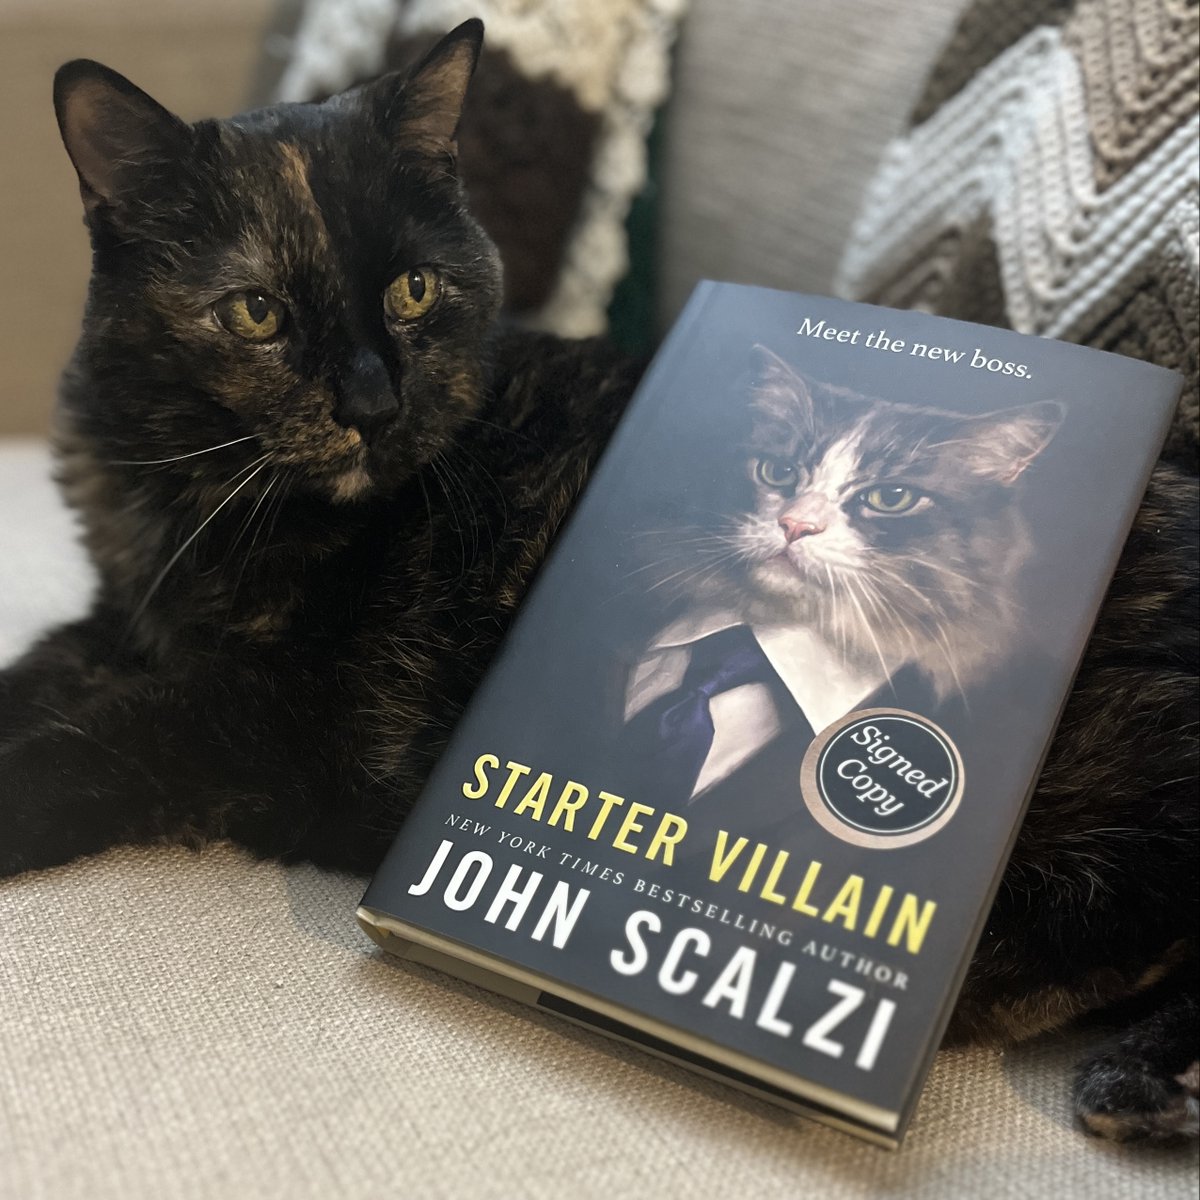 Weekend reading? Peanut, the real boss around here, recommends Starter Villain. Her human read it & found it to be thoroughly delightful. We’ve got signed copies available at both locations & online! P.S. Kudos to the team at @torbooks & @scalzi for this fabulous cover.